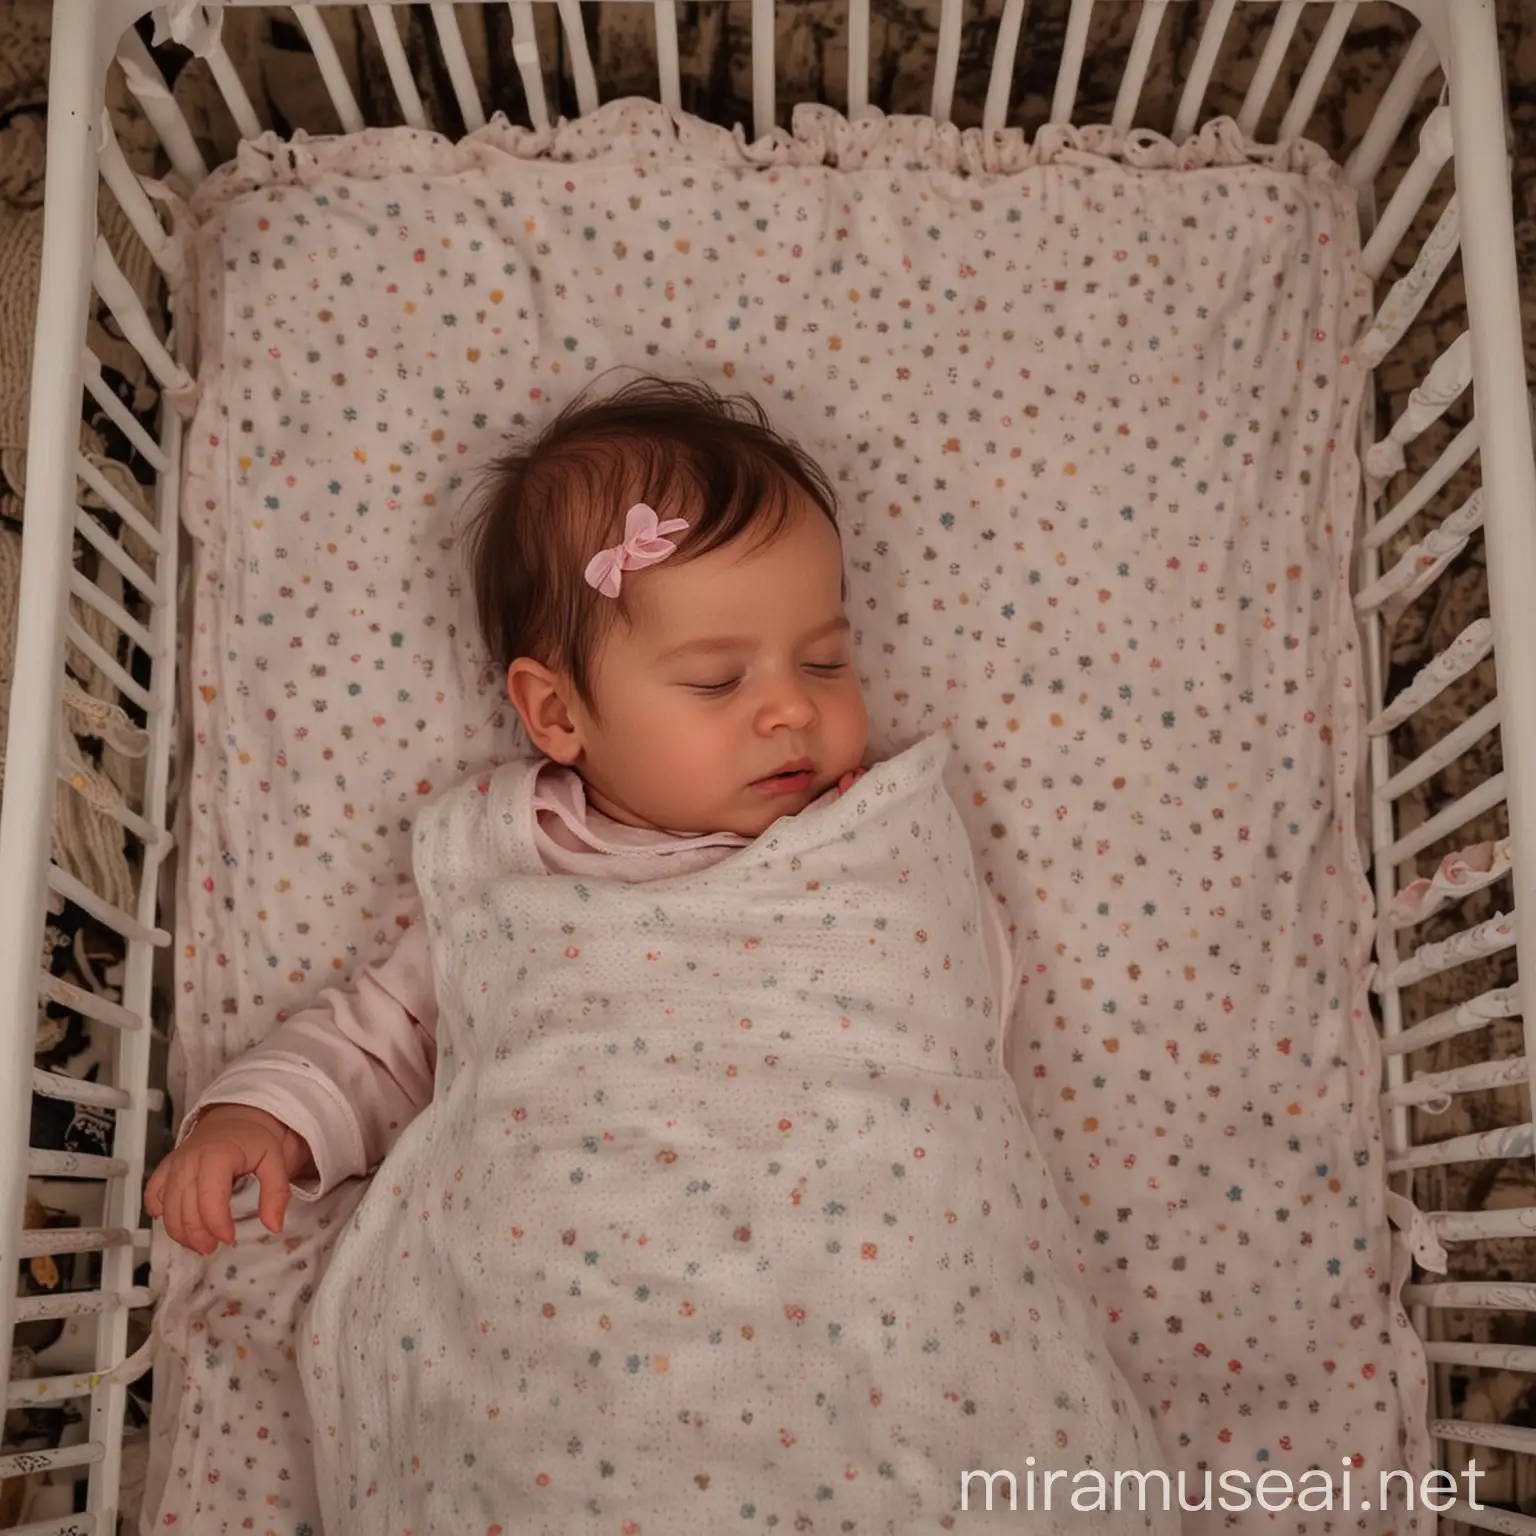 Sleeping Baby Girl in Cot at Night